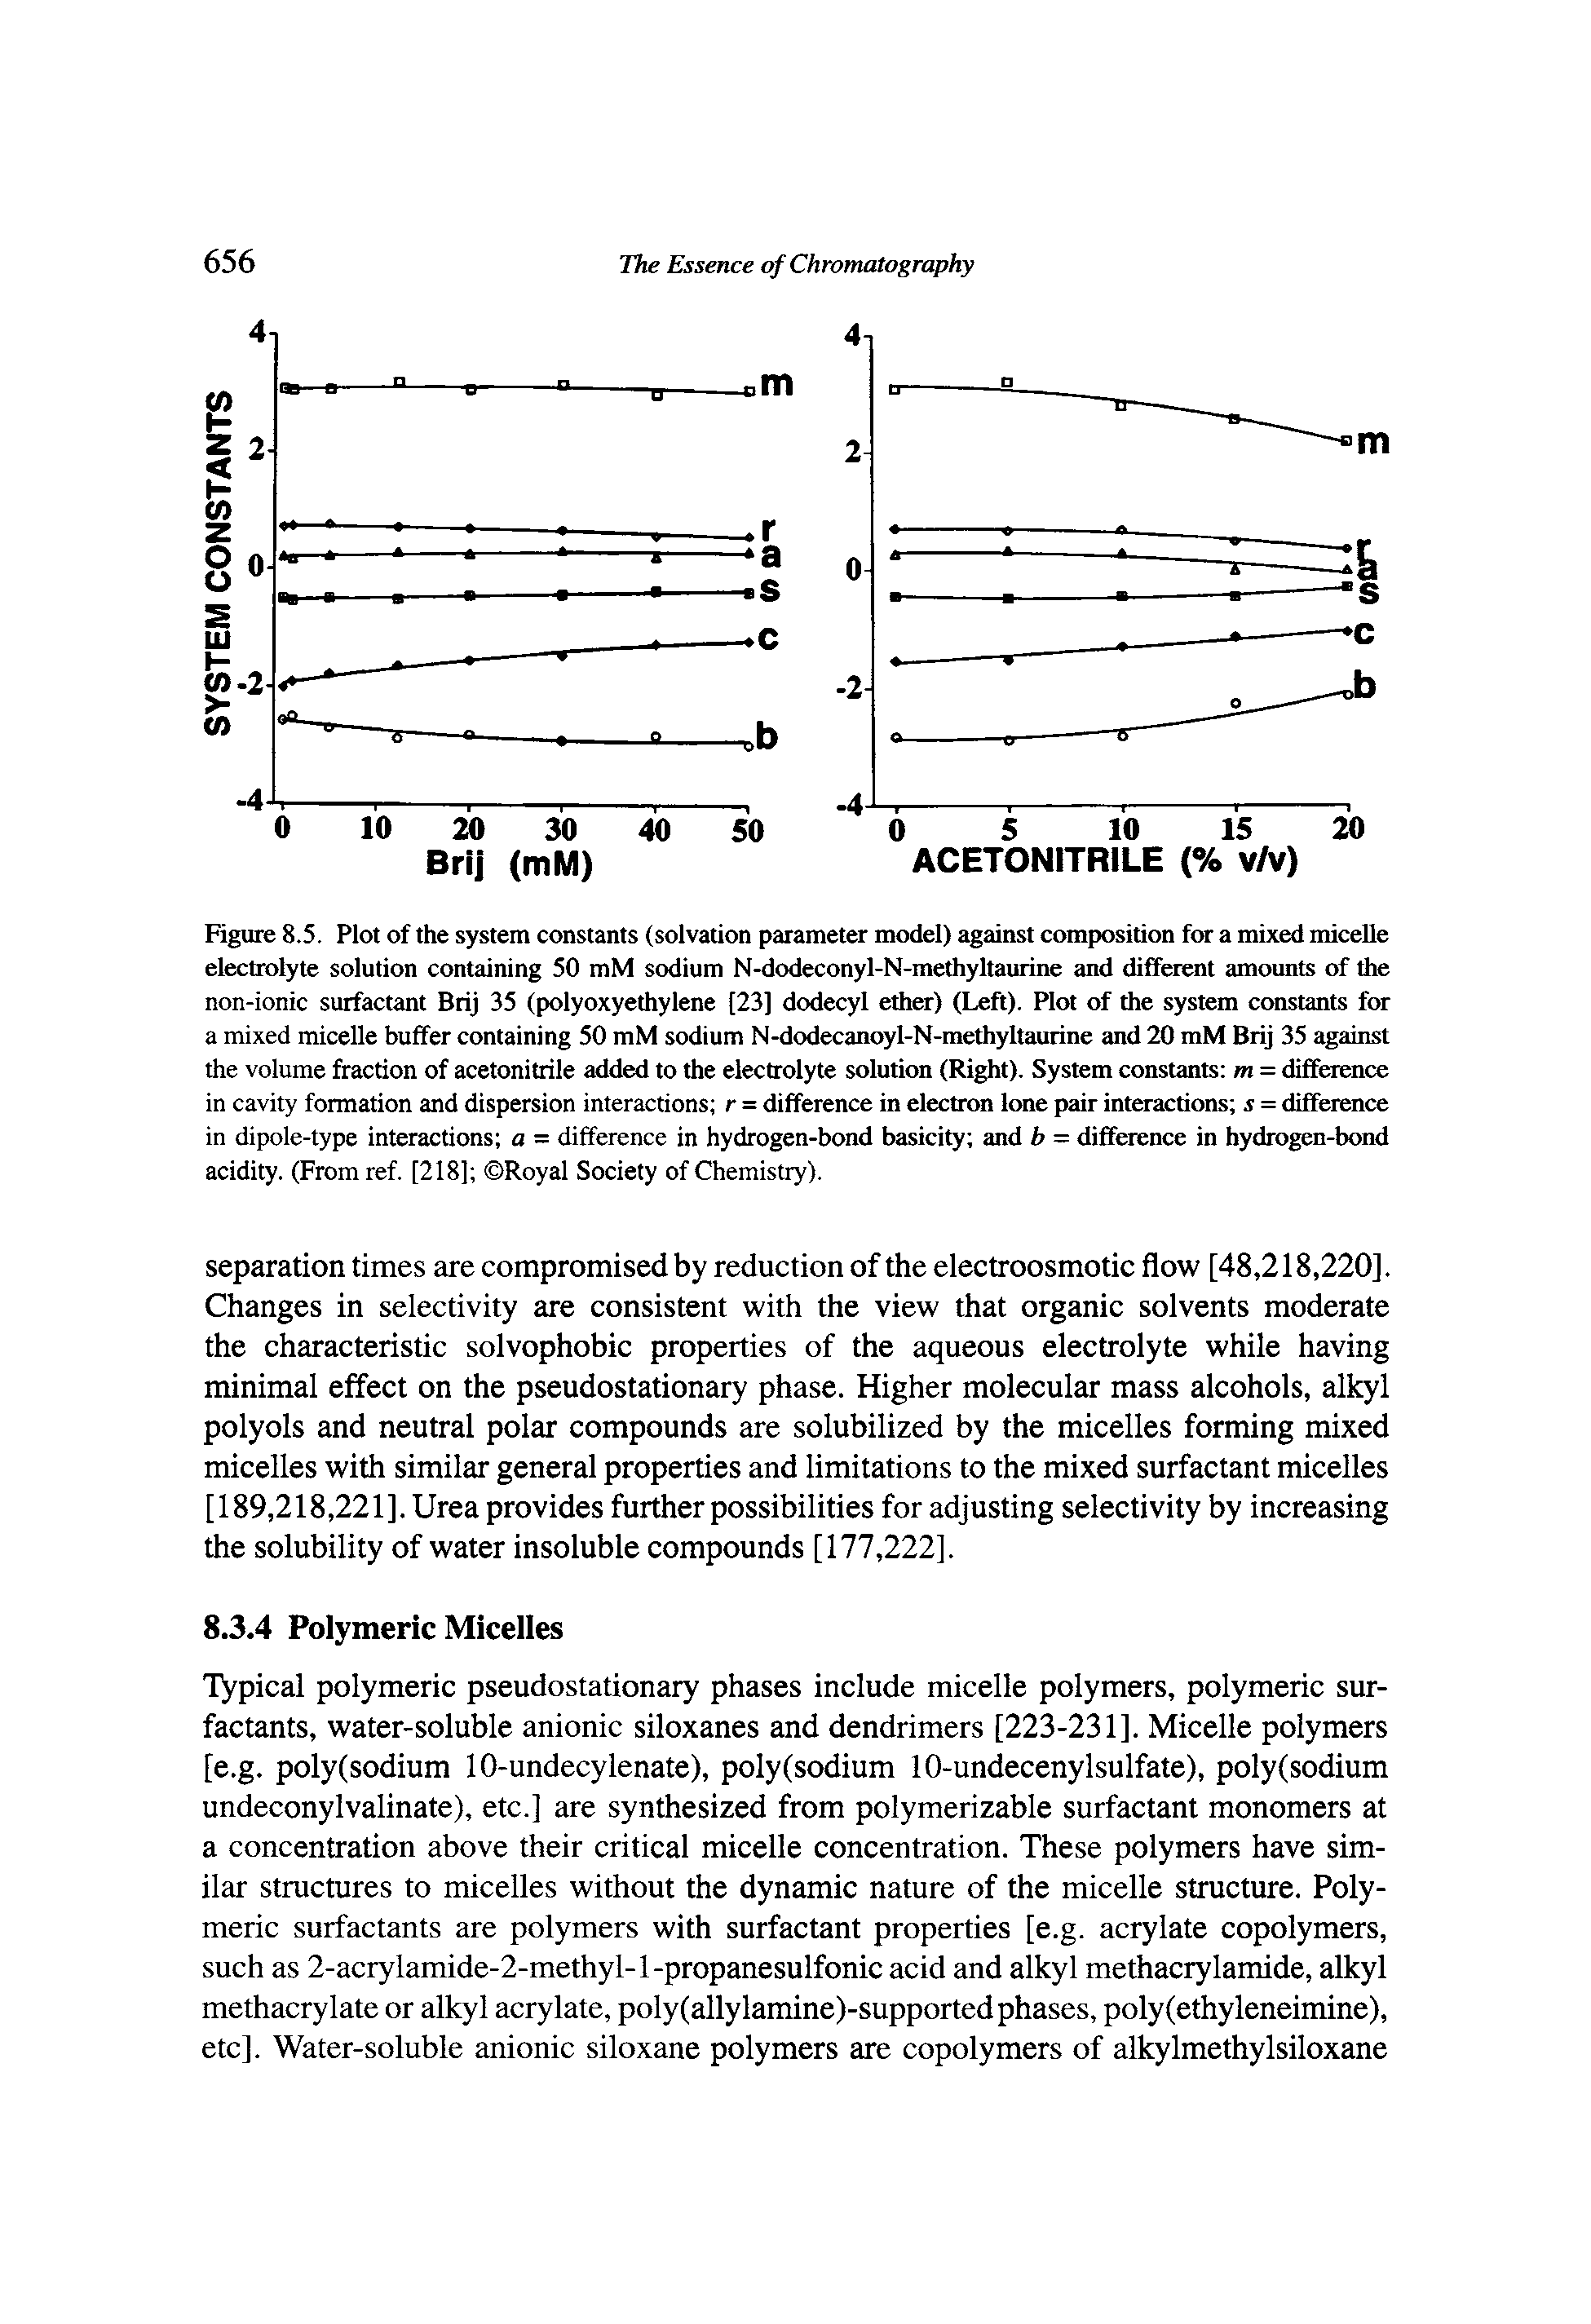 Figure 8.5. Plot of the system constants (solvation parameter model) against composition for a mixed micelle electrolyte solution containing 50 mM sodium N-dodeconyl-N-methyltaurine and different amounts of the non-ionic surfactant Brij 35 (polyoxyethylene [23] dodecyl ether) (Left). Plot of the system constants for a mixed micelle buffer containing 50 mM sodium N-dodecanoyl-N-methyltaurine and 20 mM Brij 35 against the volume fraction of acetonitrile added to the electrolyte solution (Right). System constants m = difference in cavity formation and dispersion interactions r = difference in electron lone pair interactions s = difference in dipole-type interactions a = difference in hydrogen-bond basicity and b = difference in hydrogen-bond acidity. (From ref. [218] Royal Society of Chemistry).